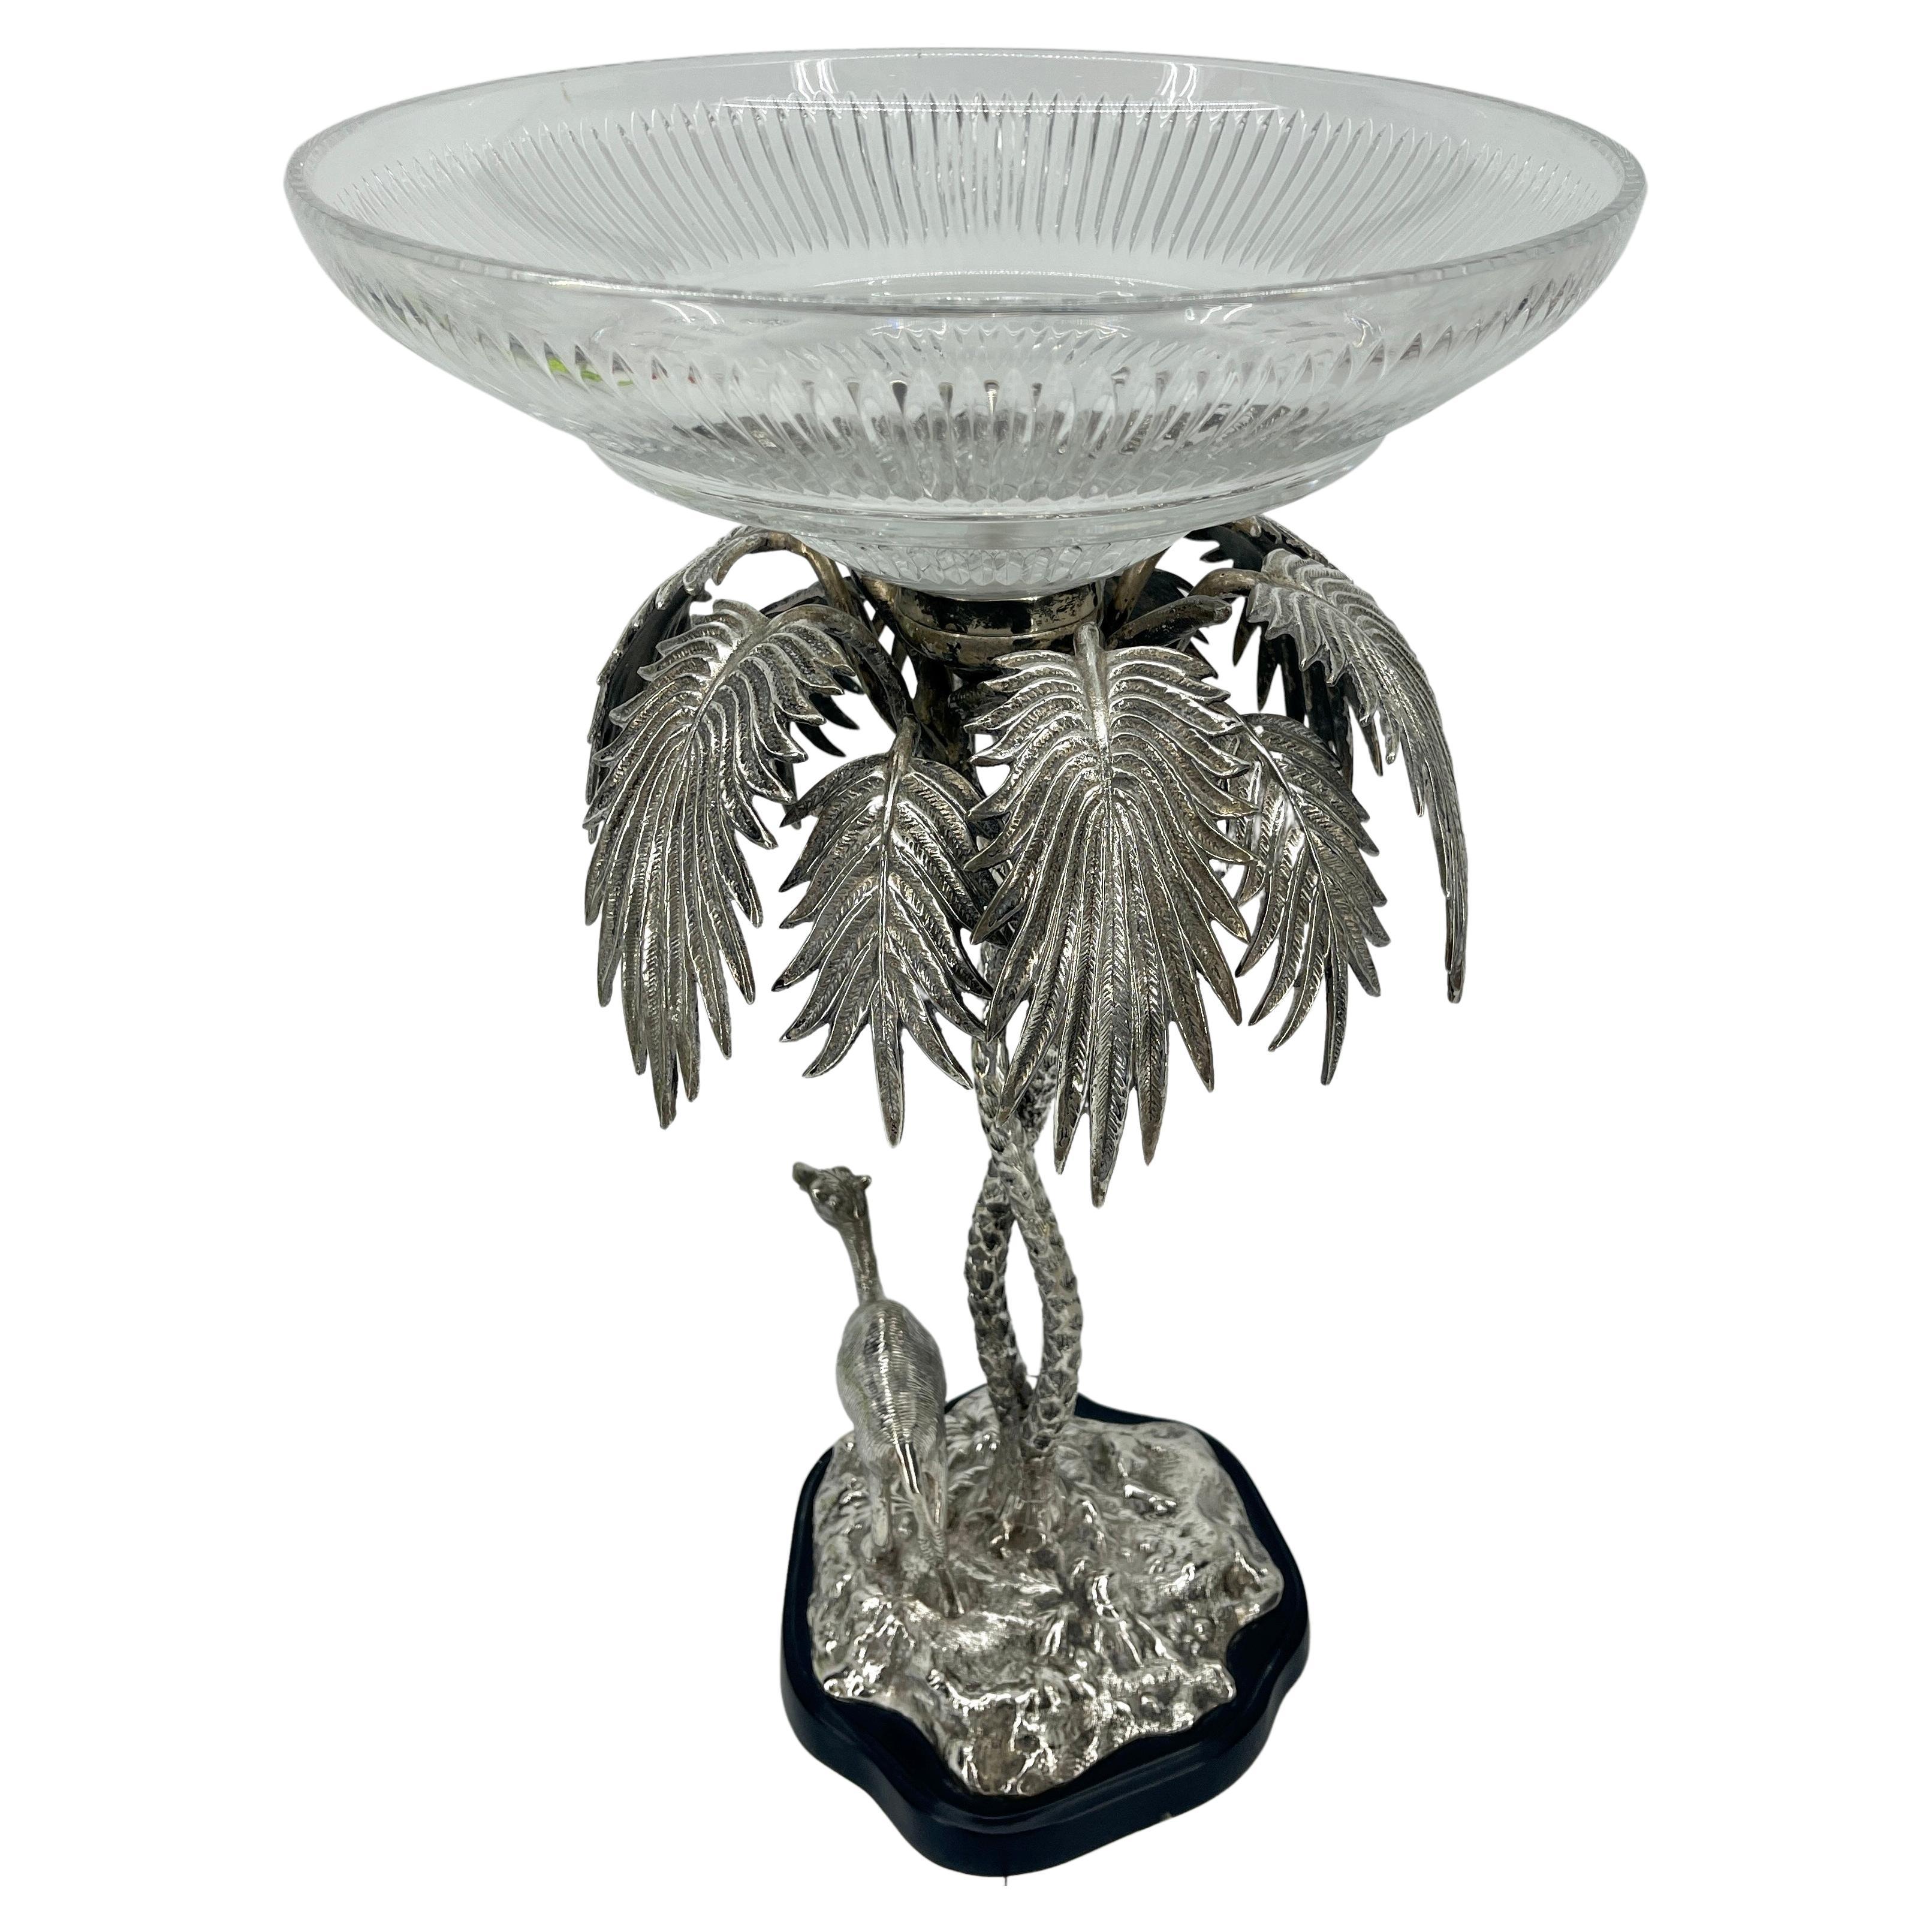 Large Victorian Silver Plate Centerpiece and Matching Cut Crystal Dish With Camel and Palm Tree Decorations. 

Made in the mid 19th Century by Elkington, Mason & Co., this spectacular Victorian centerpiece has a central glass bowl.